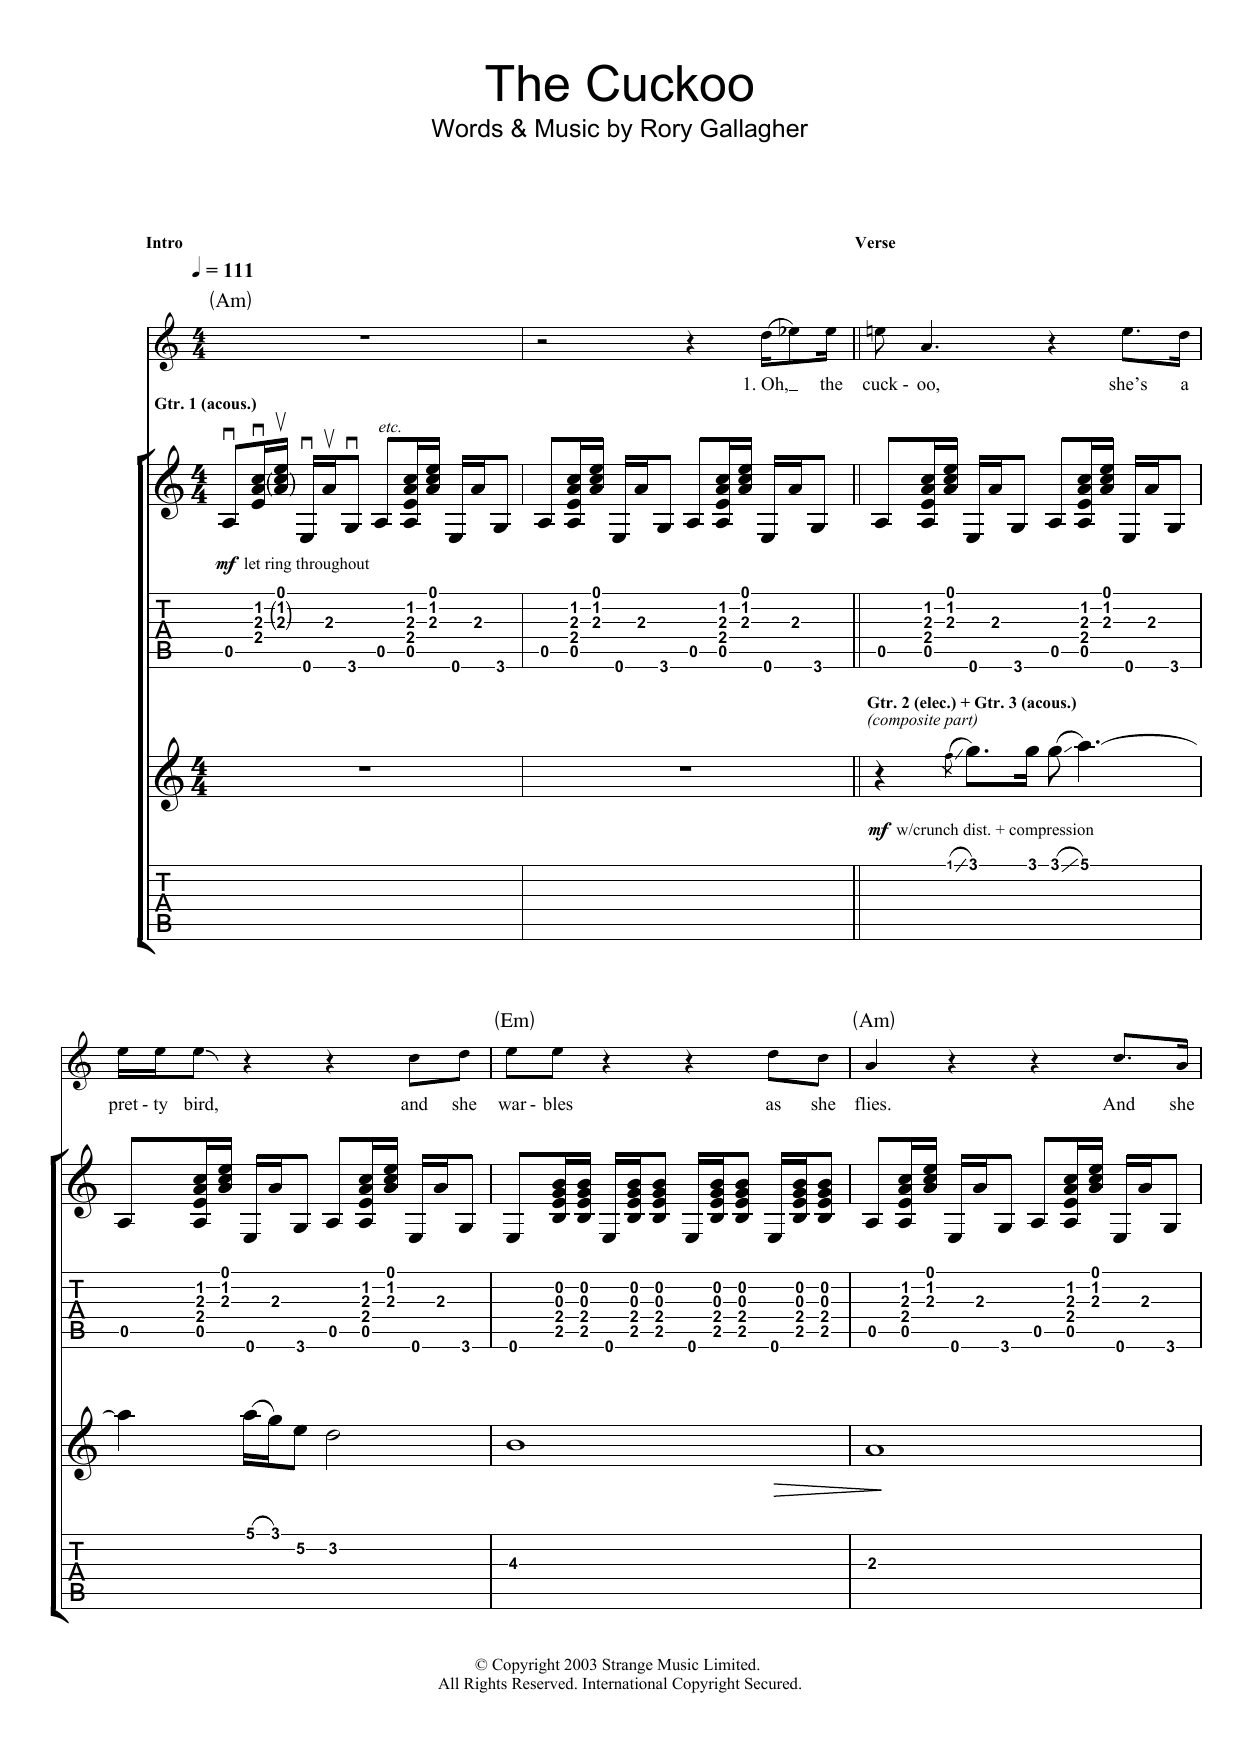 Download Rory Gallagher The Cuckoo Sheet Music